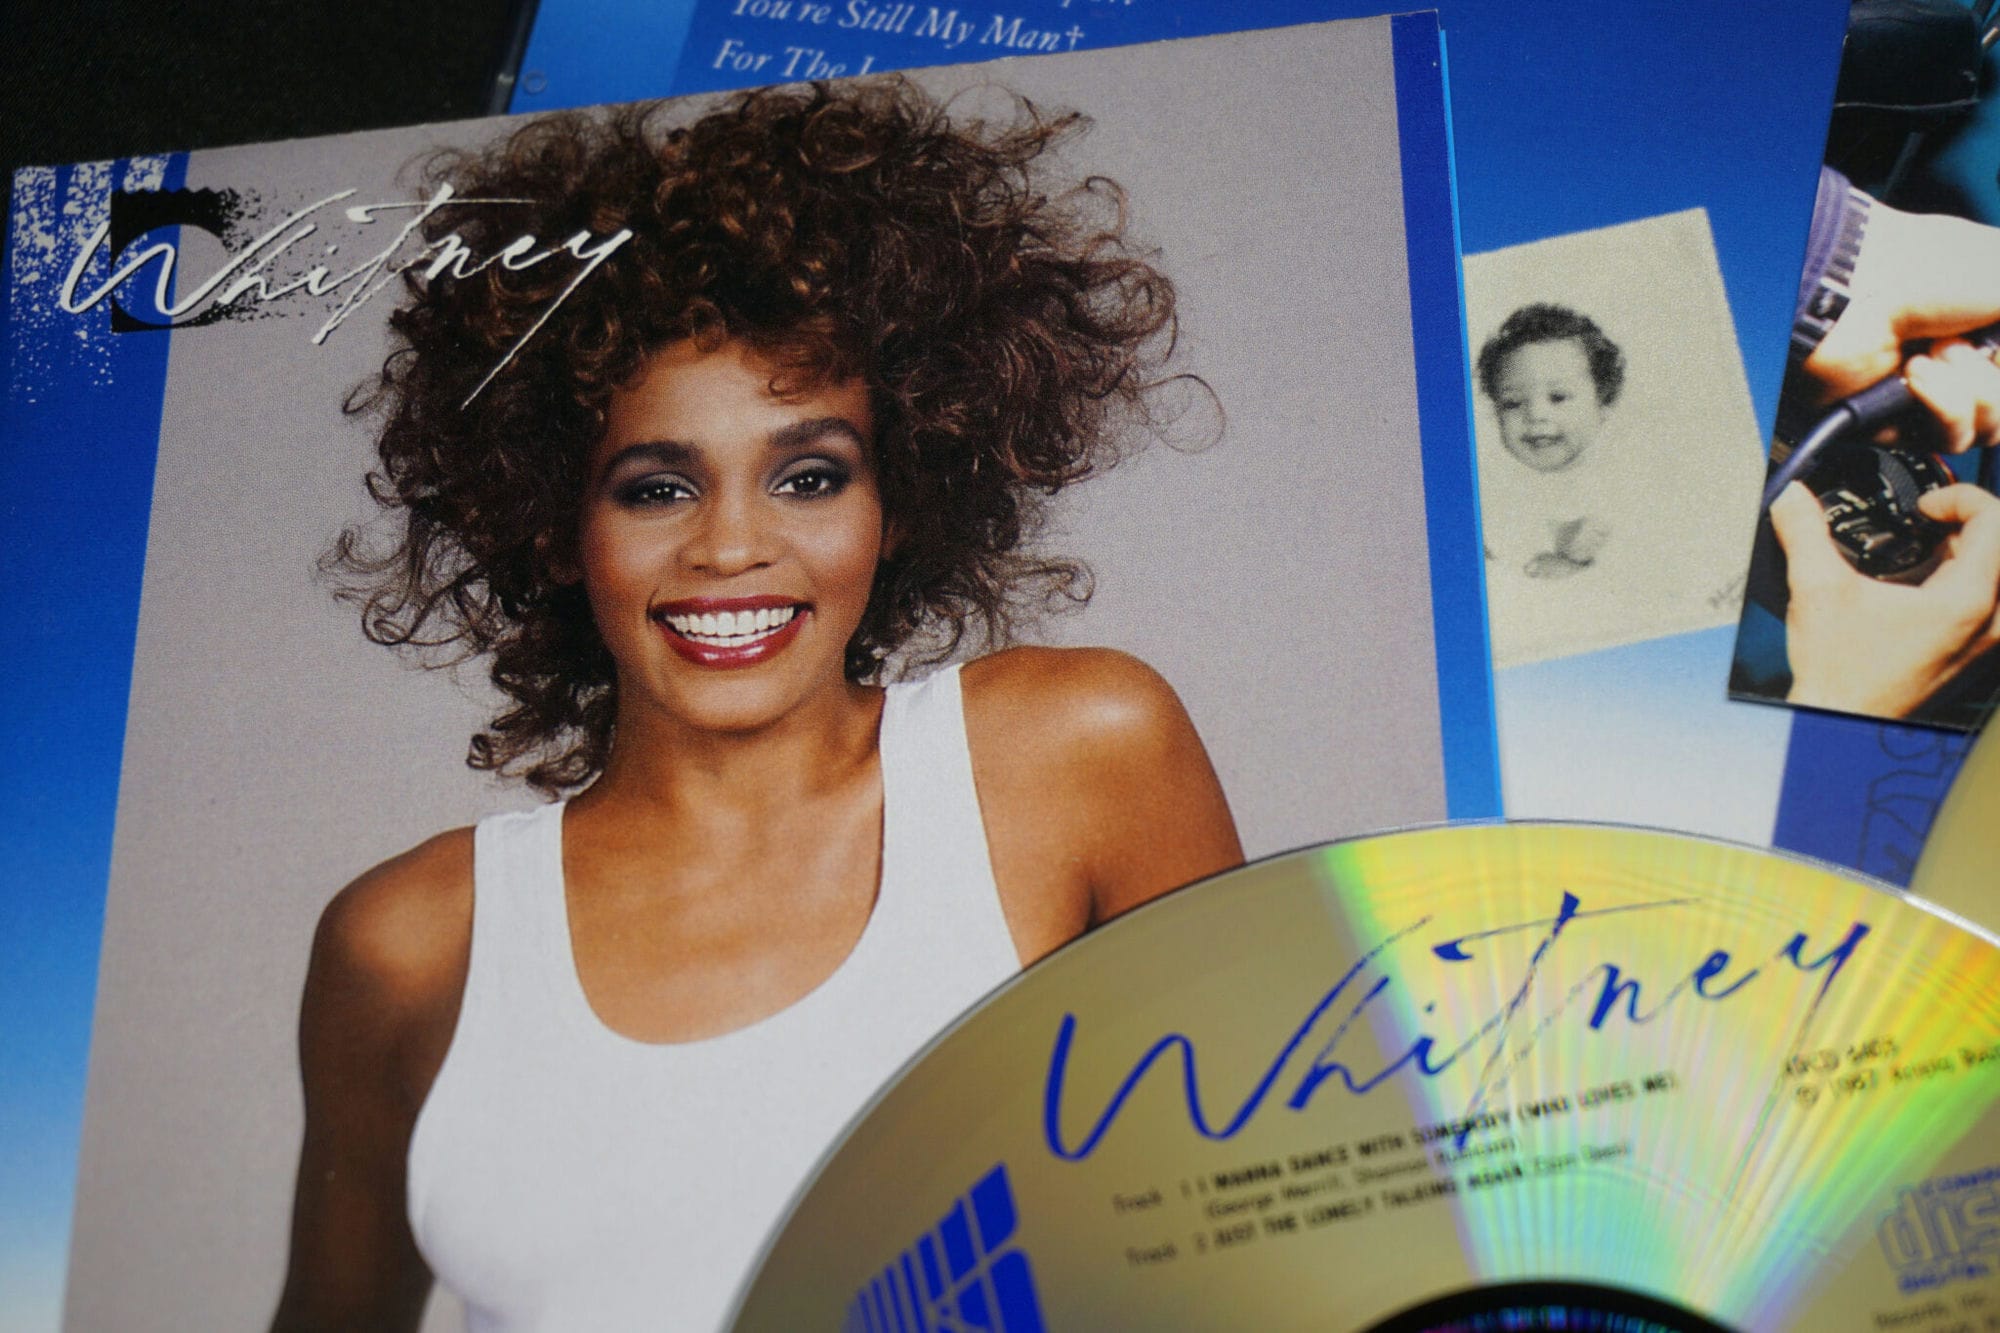 Rome Italy April 23 2020 Whitney Cd Cover The